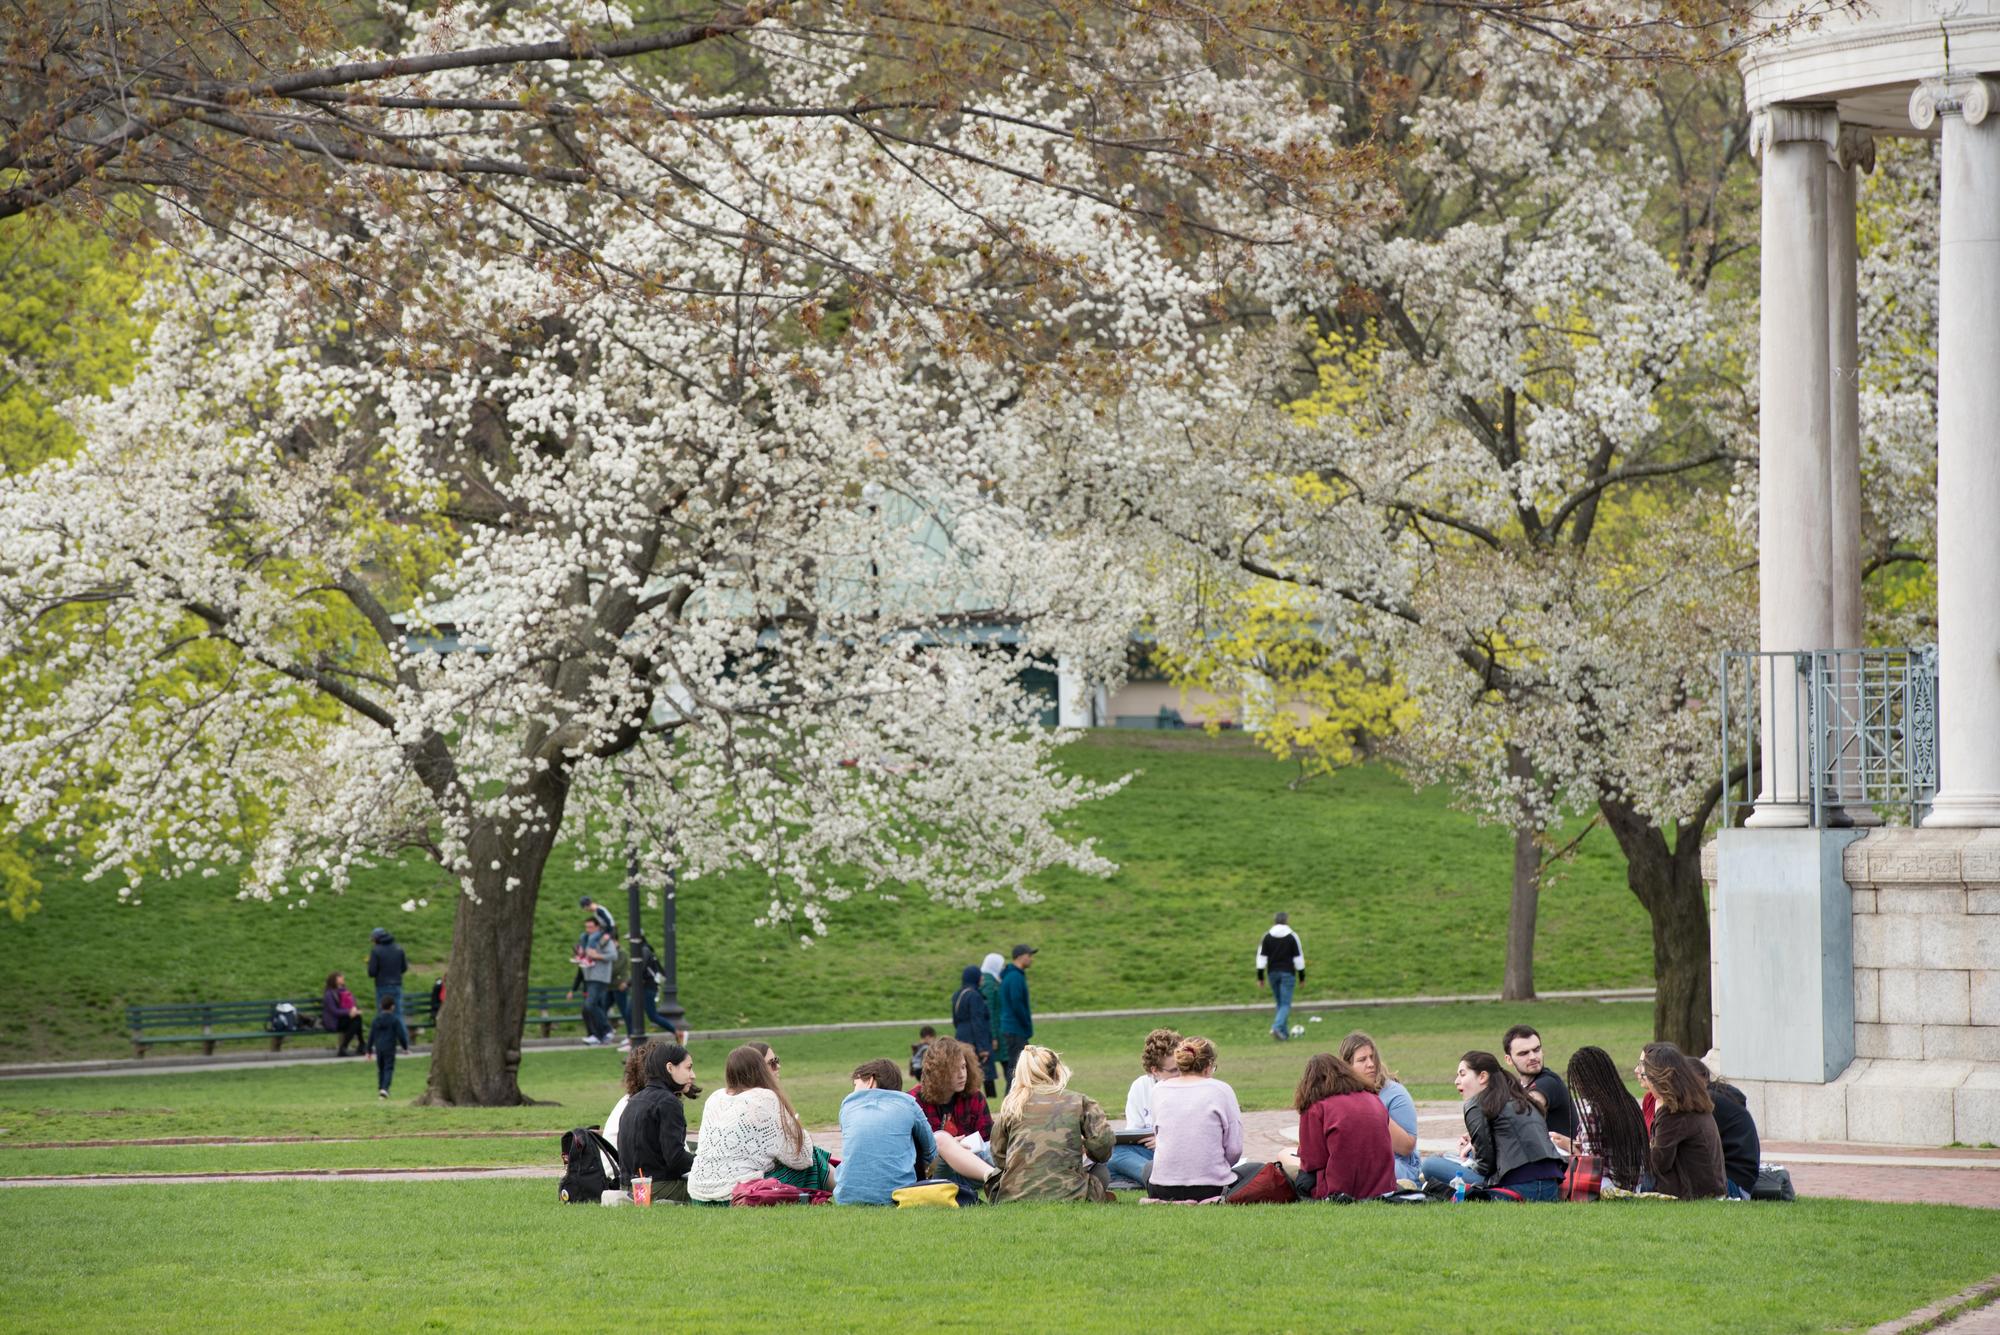 Students gathered in a park with a white cherry blossom tree in the background